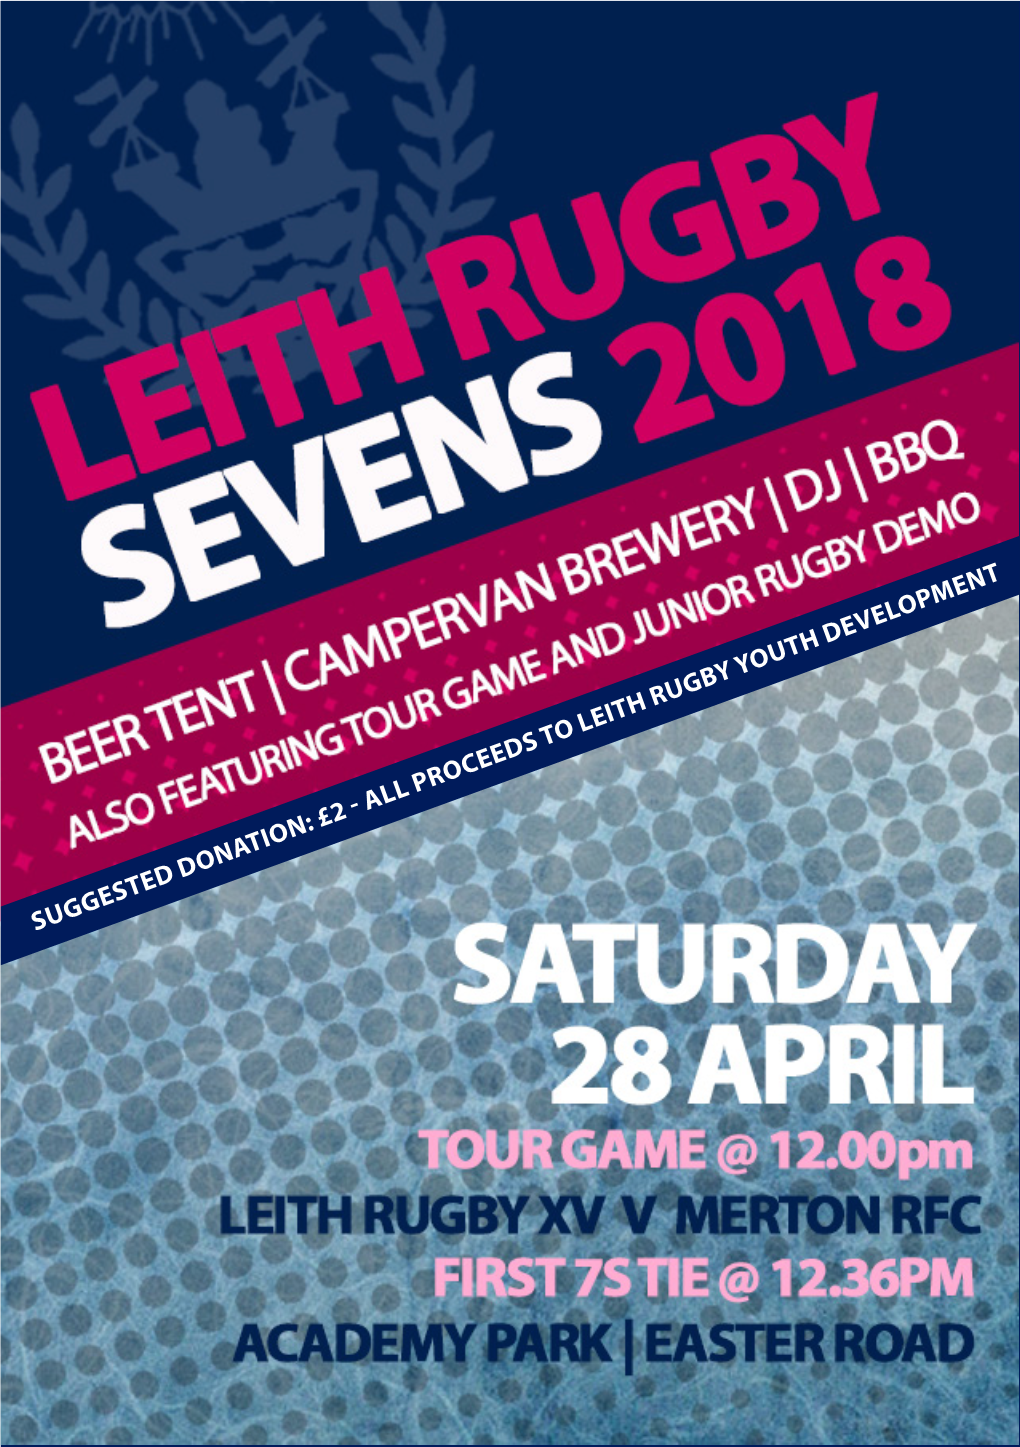 Proceeds to Leith Rugby Youth Development